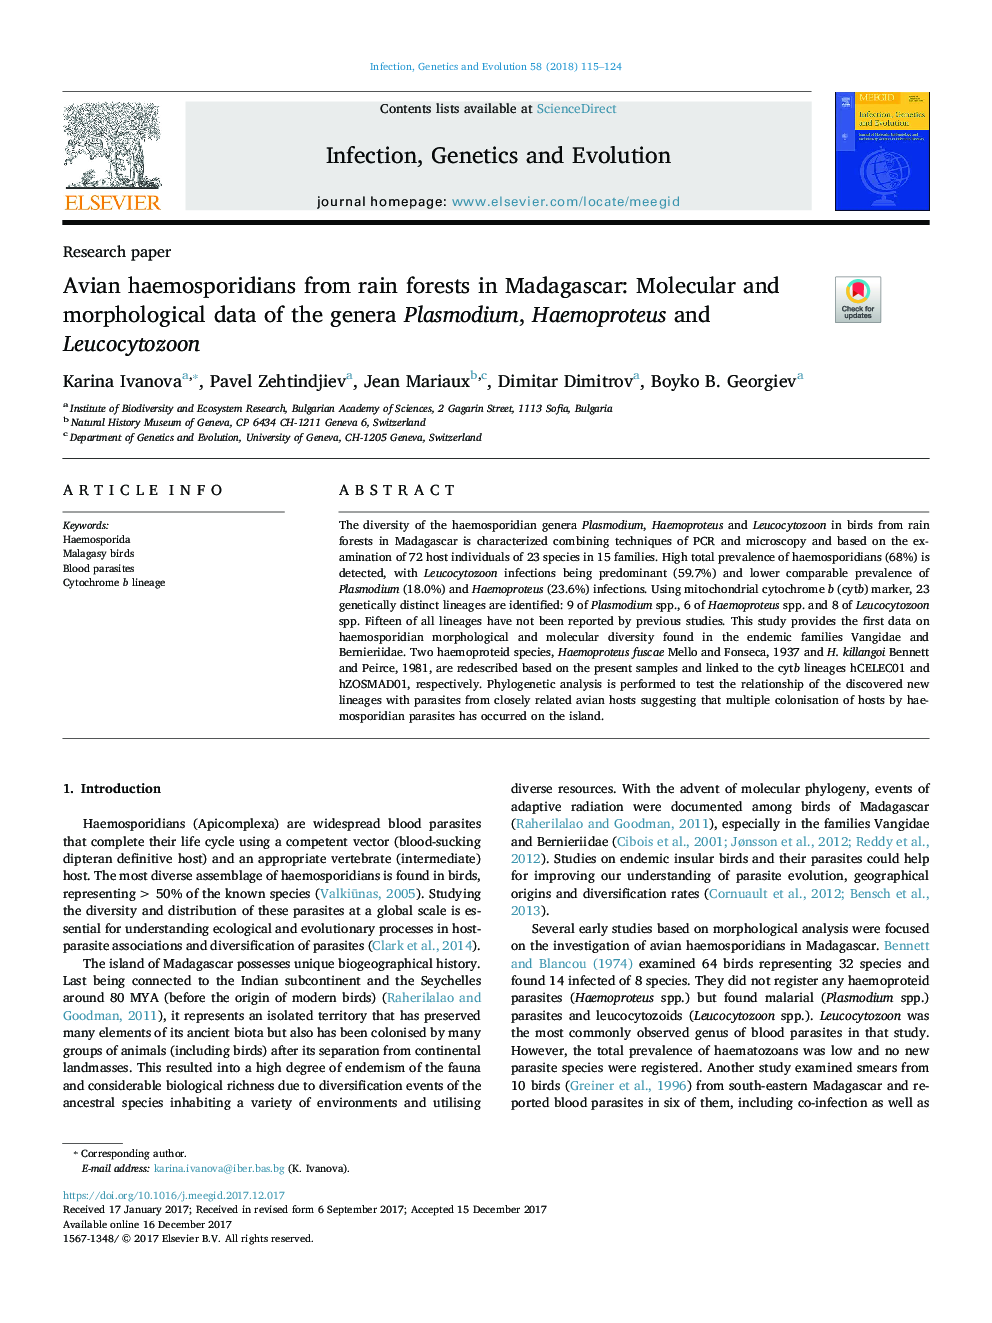 Avian haemosporidians from rain forests in Madagascar: Molecular and morphological data of the genera Plasmodium, Haemoproteus and Leucocytozoon